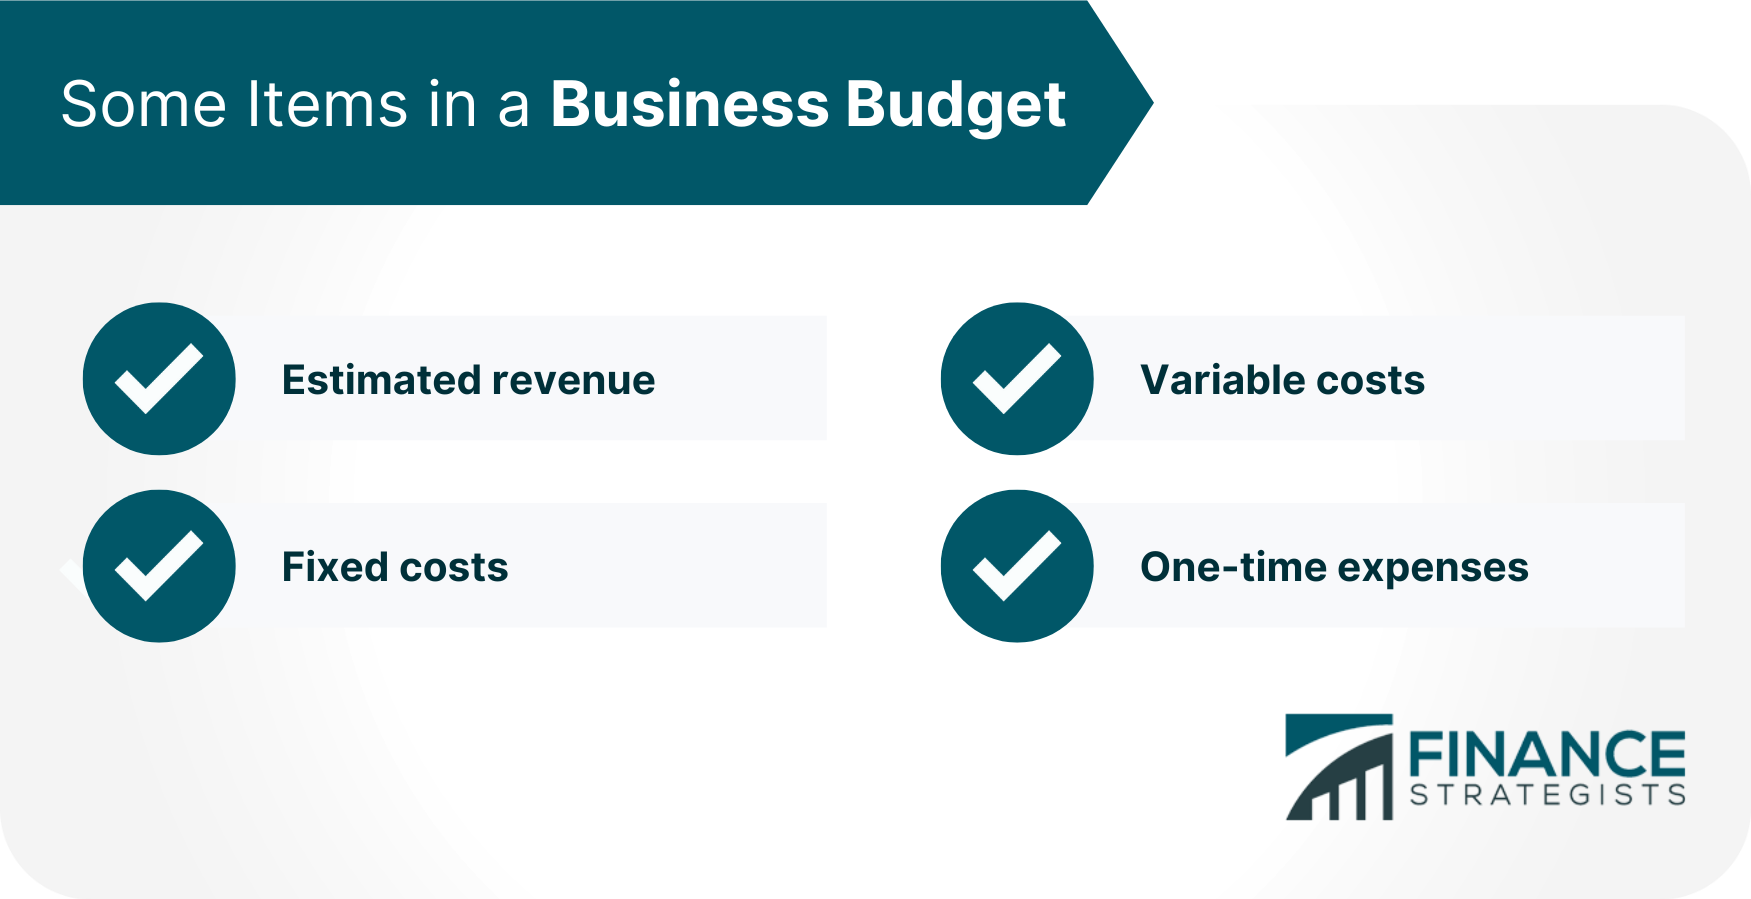 Some Items in a Business Budget